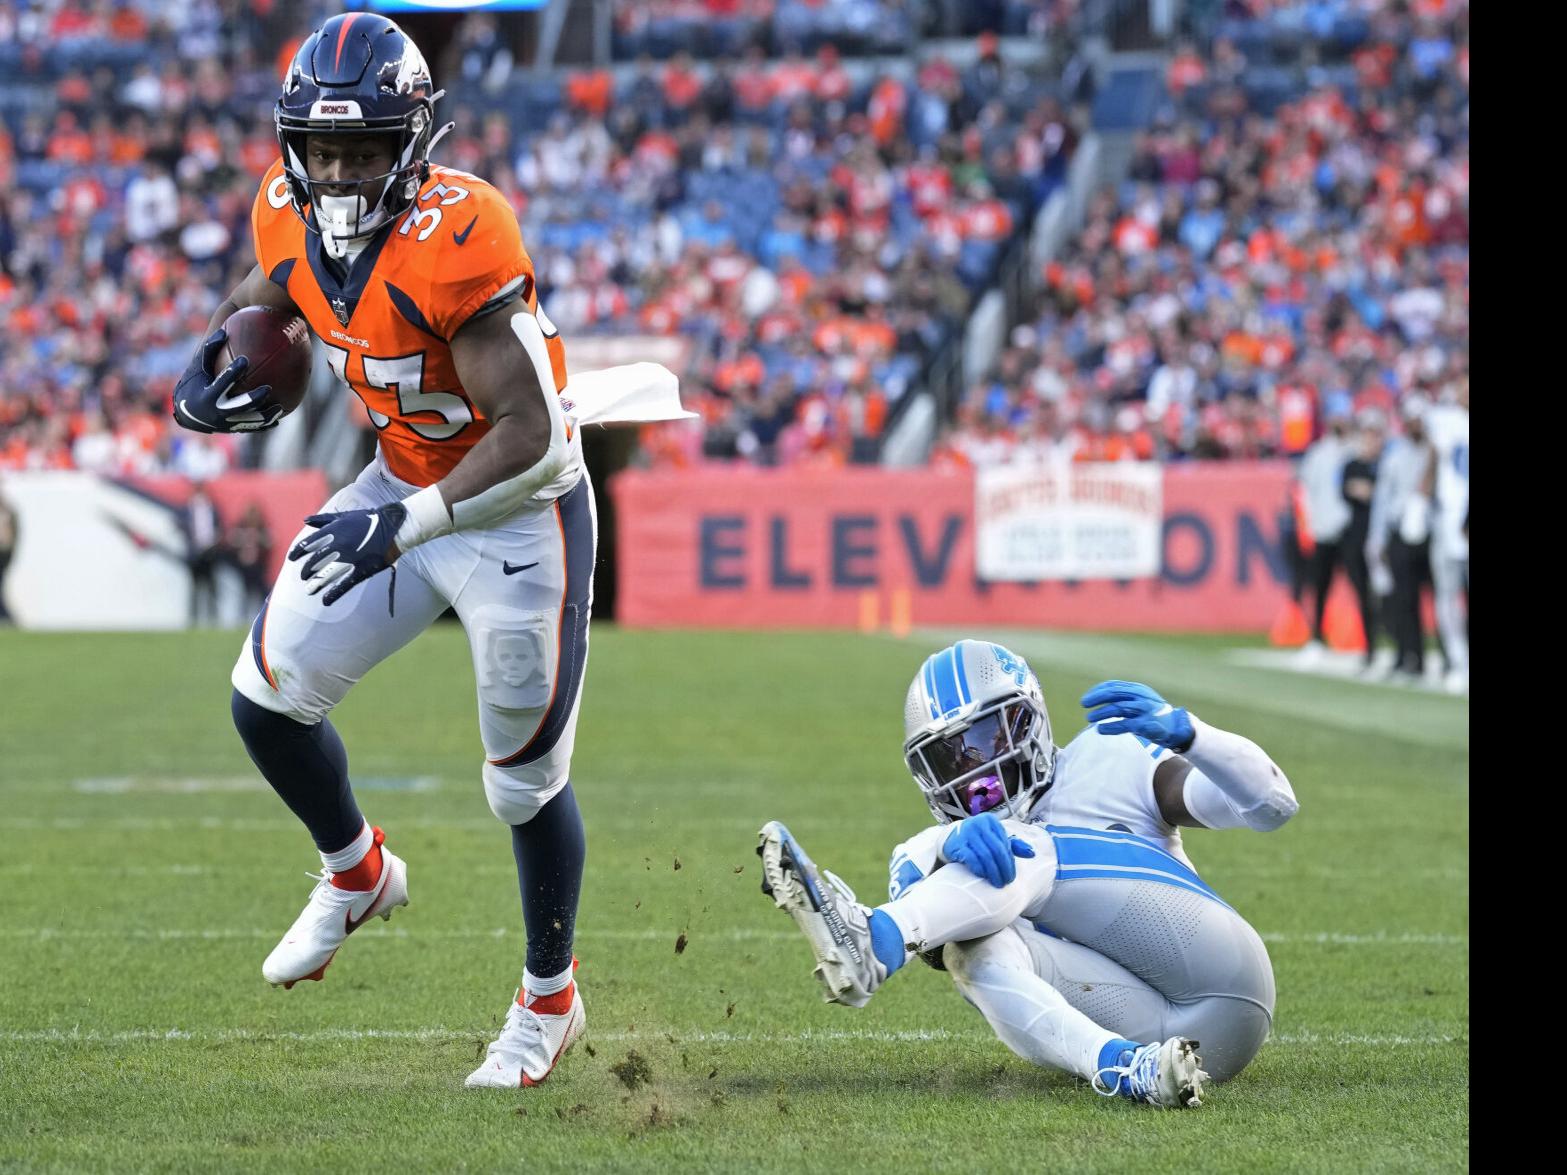 DENVER BRONCOS GAME: Broncos honor Demaryius Thomas in 38-10 win over Lions